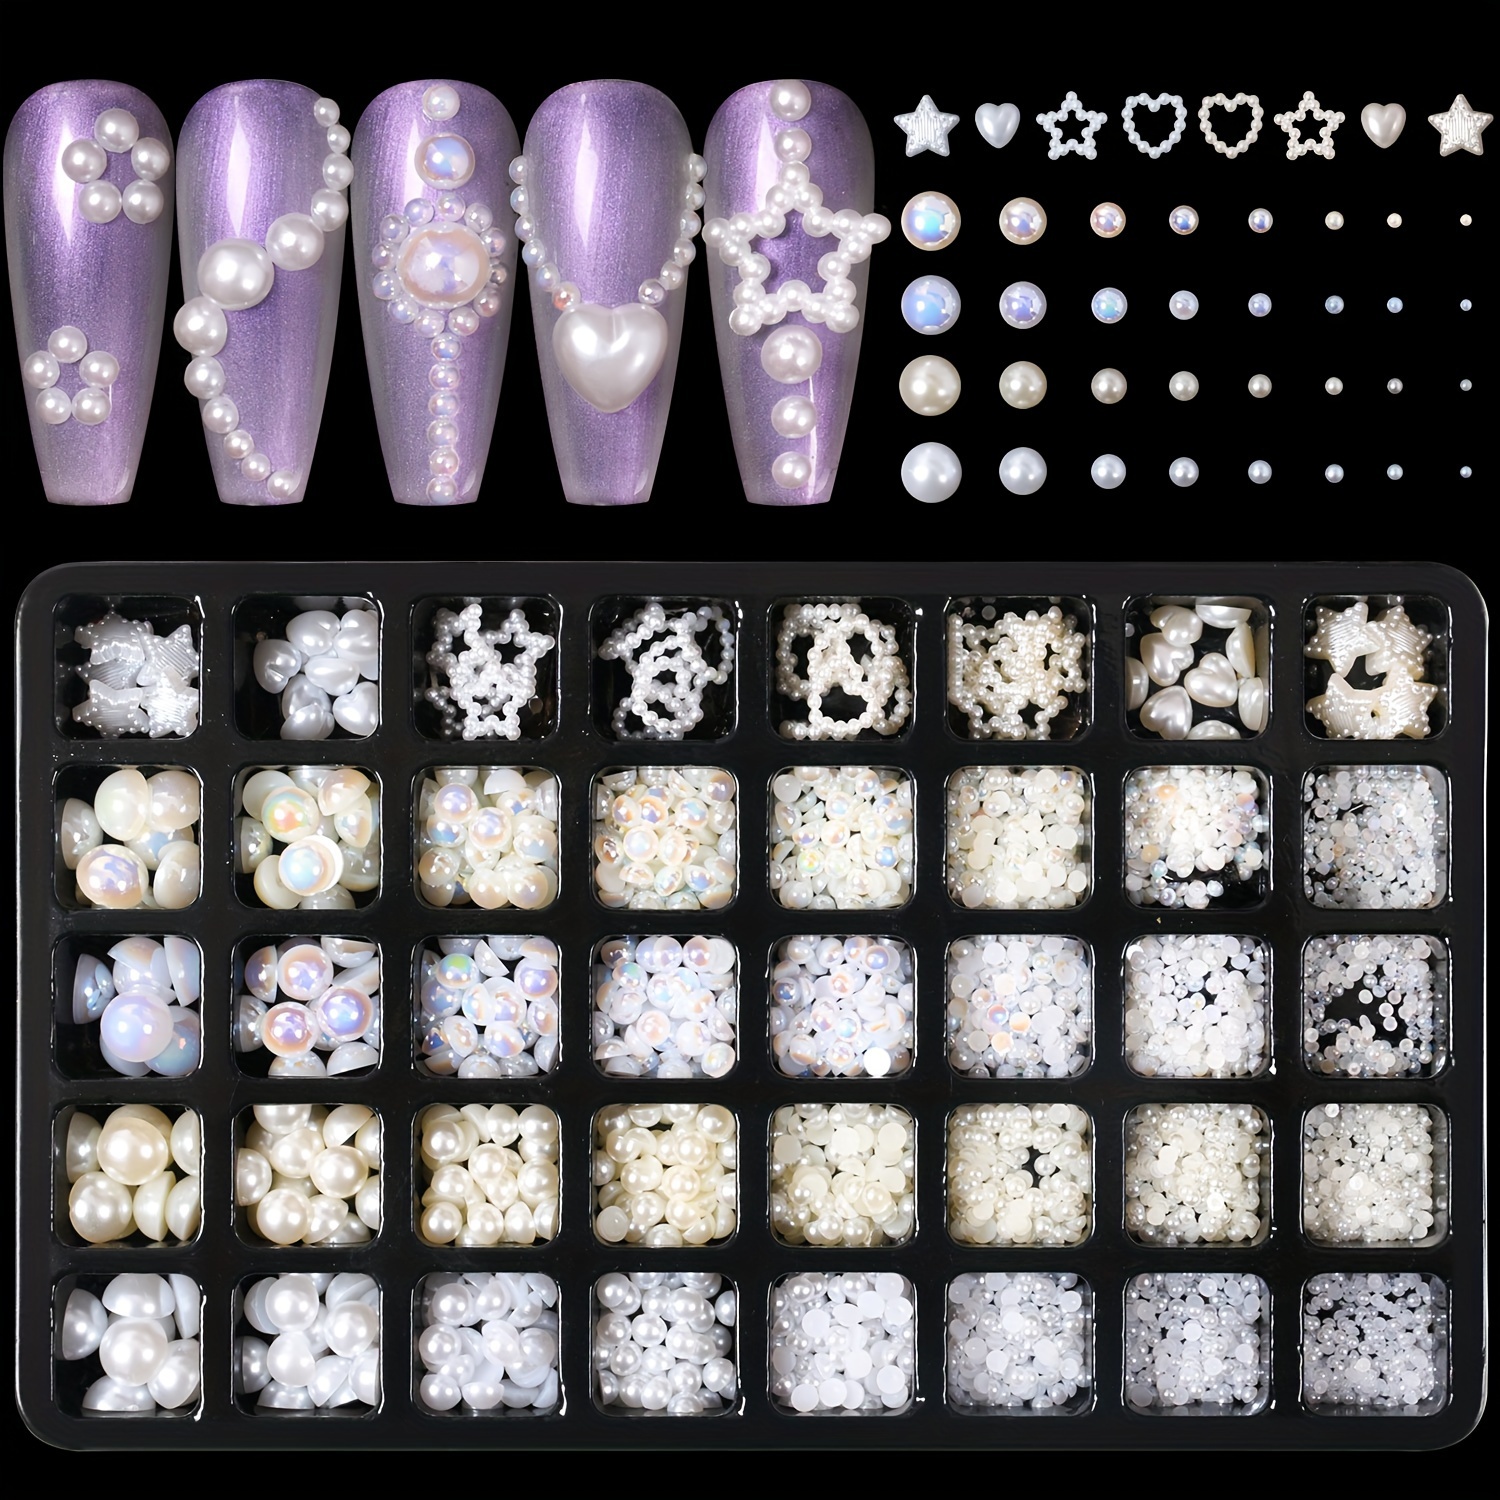 

3d Nail Charms For Coquette Nails Design Set, White Nail Bows + Assorted Pearl Heart Star Moon Bowknot Cute Nail Jewels + 3d Flower Charms And Nail Pearls